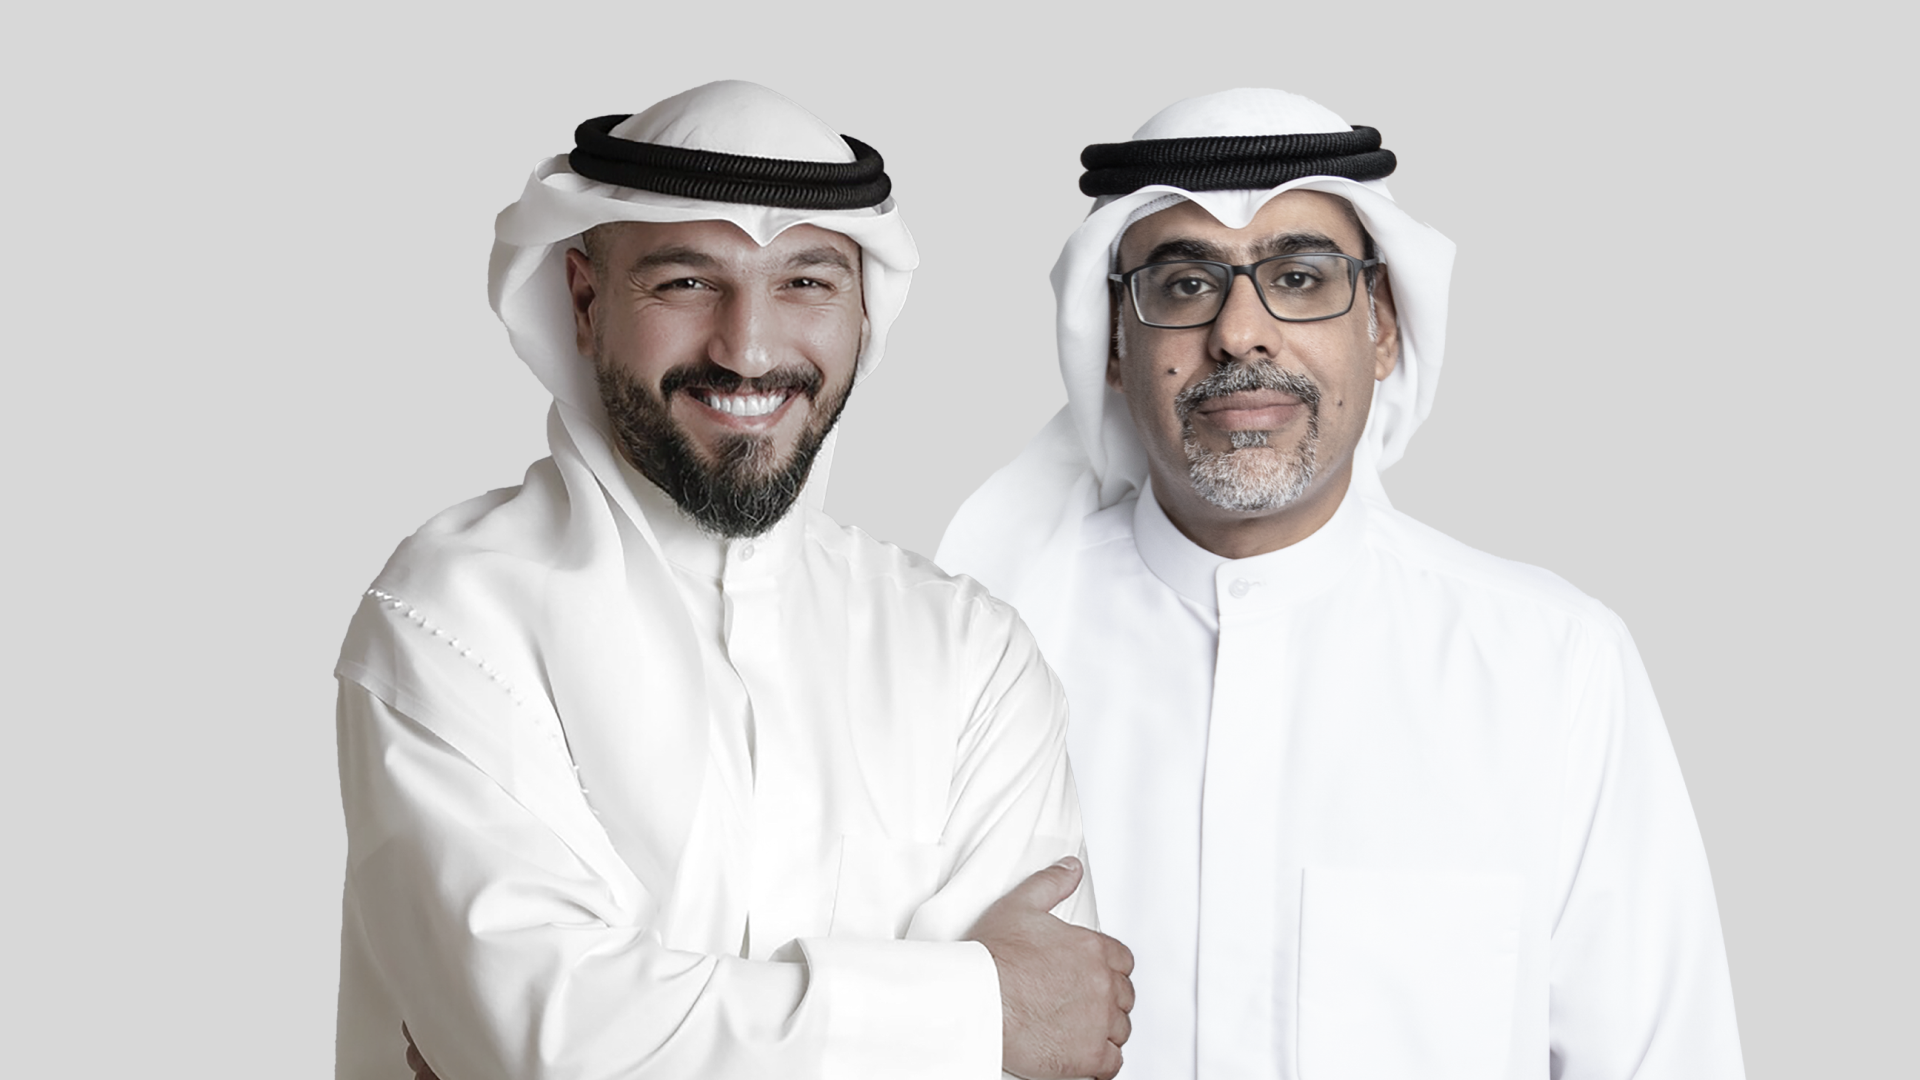 Tap Payments Achieves New Milestone with new Payment Service Provider (PSP) License from Qatar Central Bank